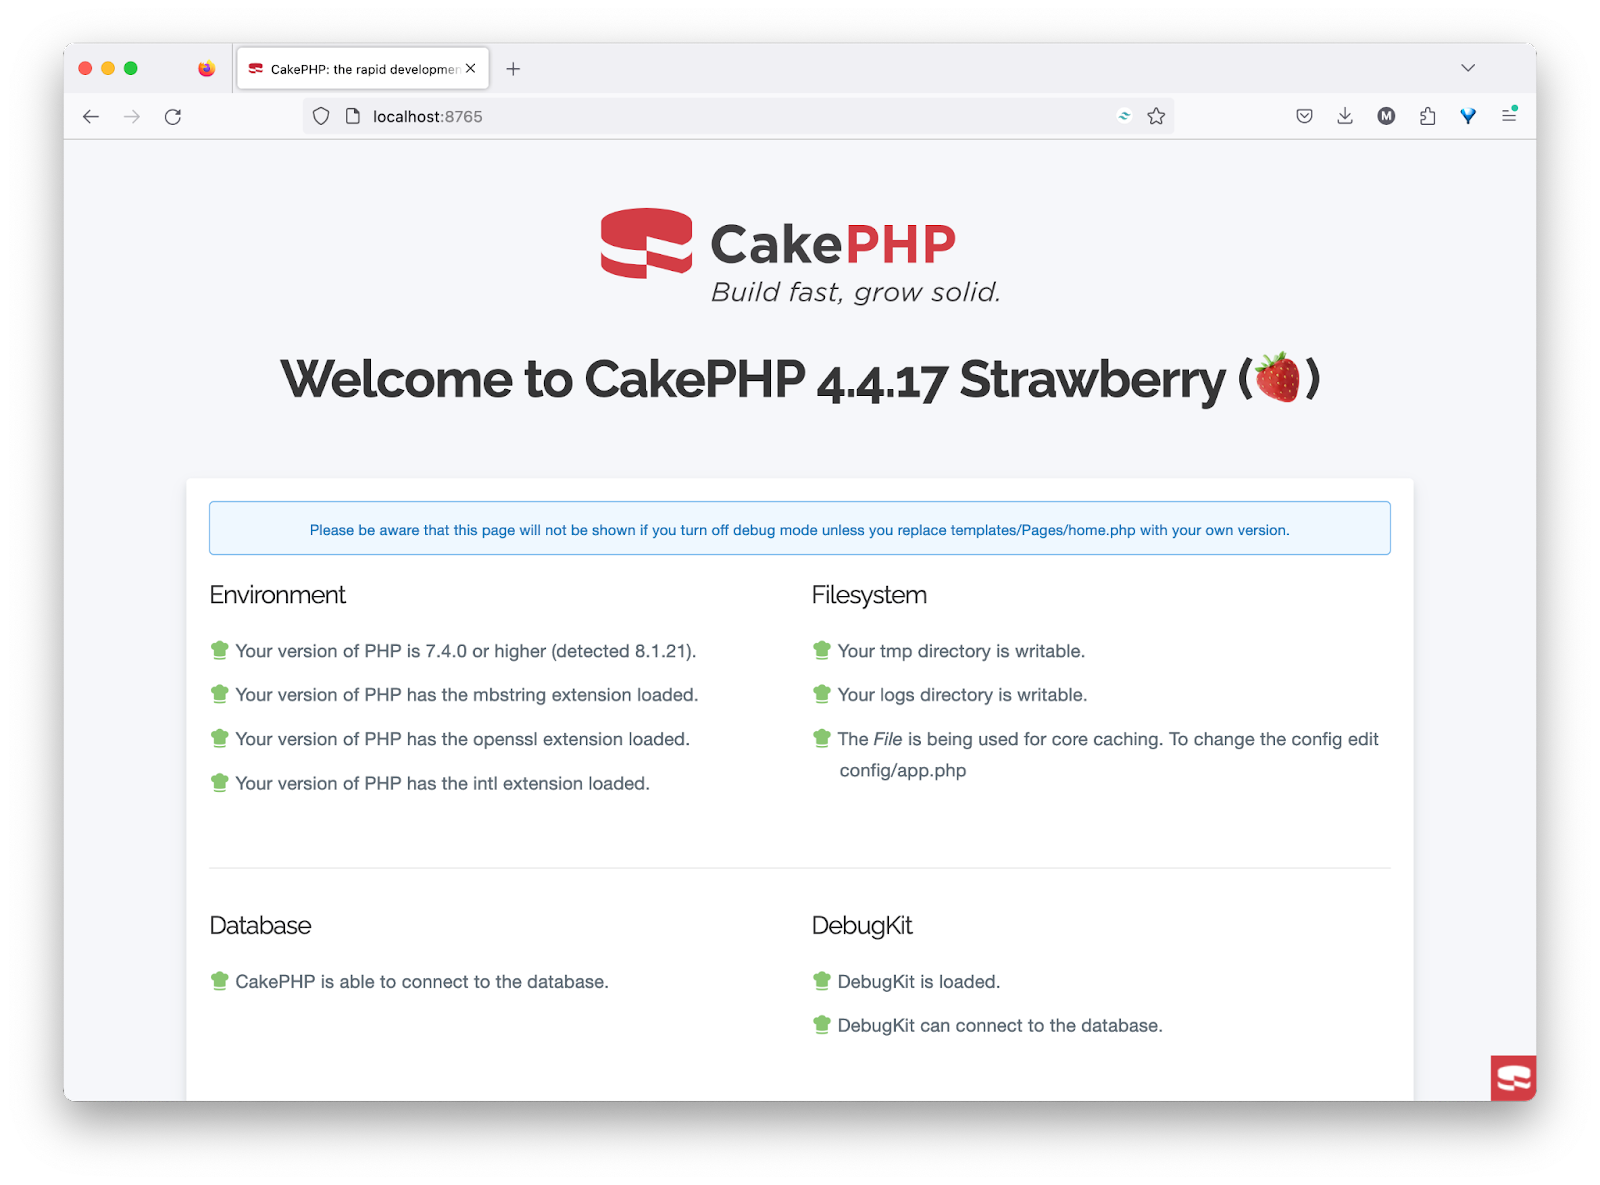 The default CakePHP 4.4.17 home page